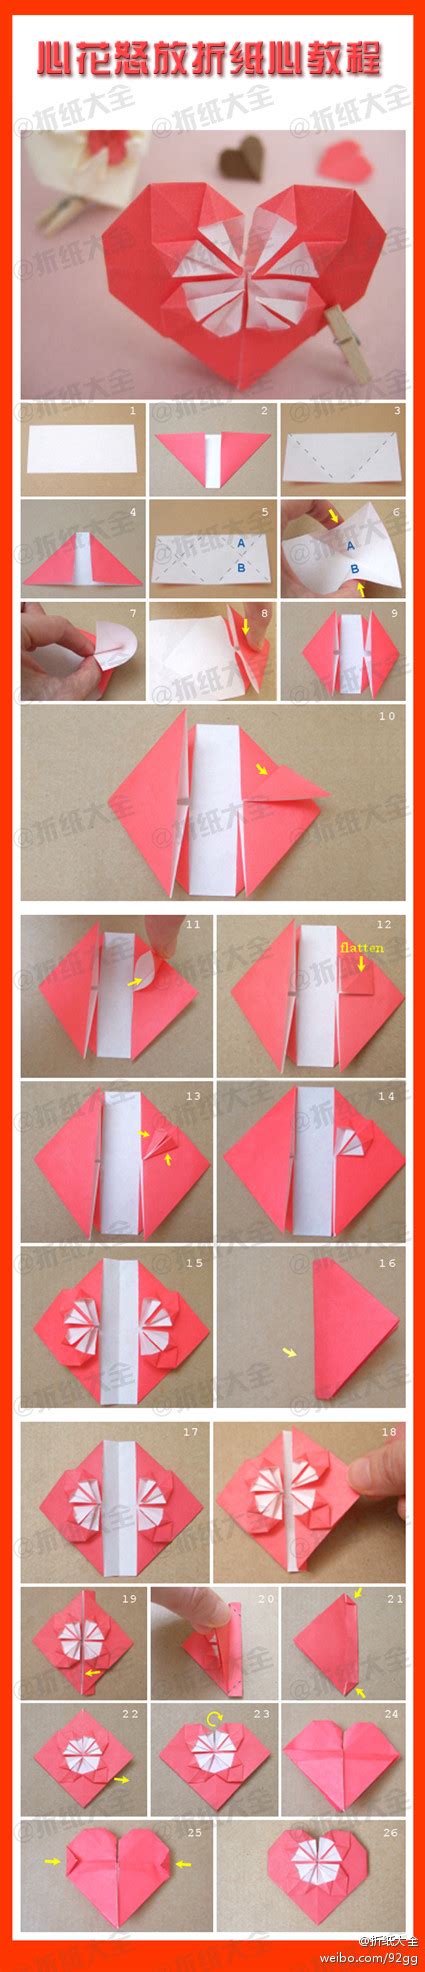 Origami Heart Box And Envelope Step By Step Flooring Reference